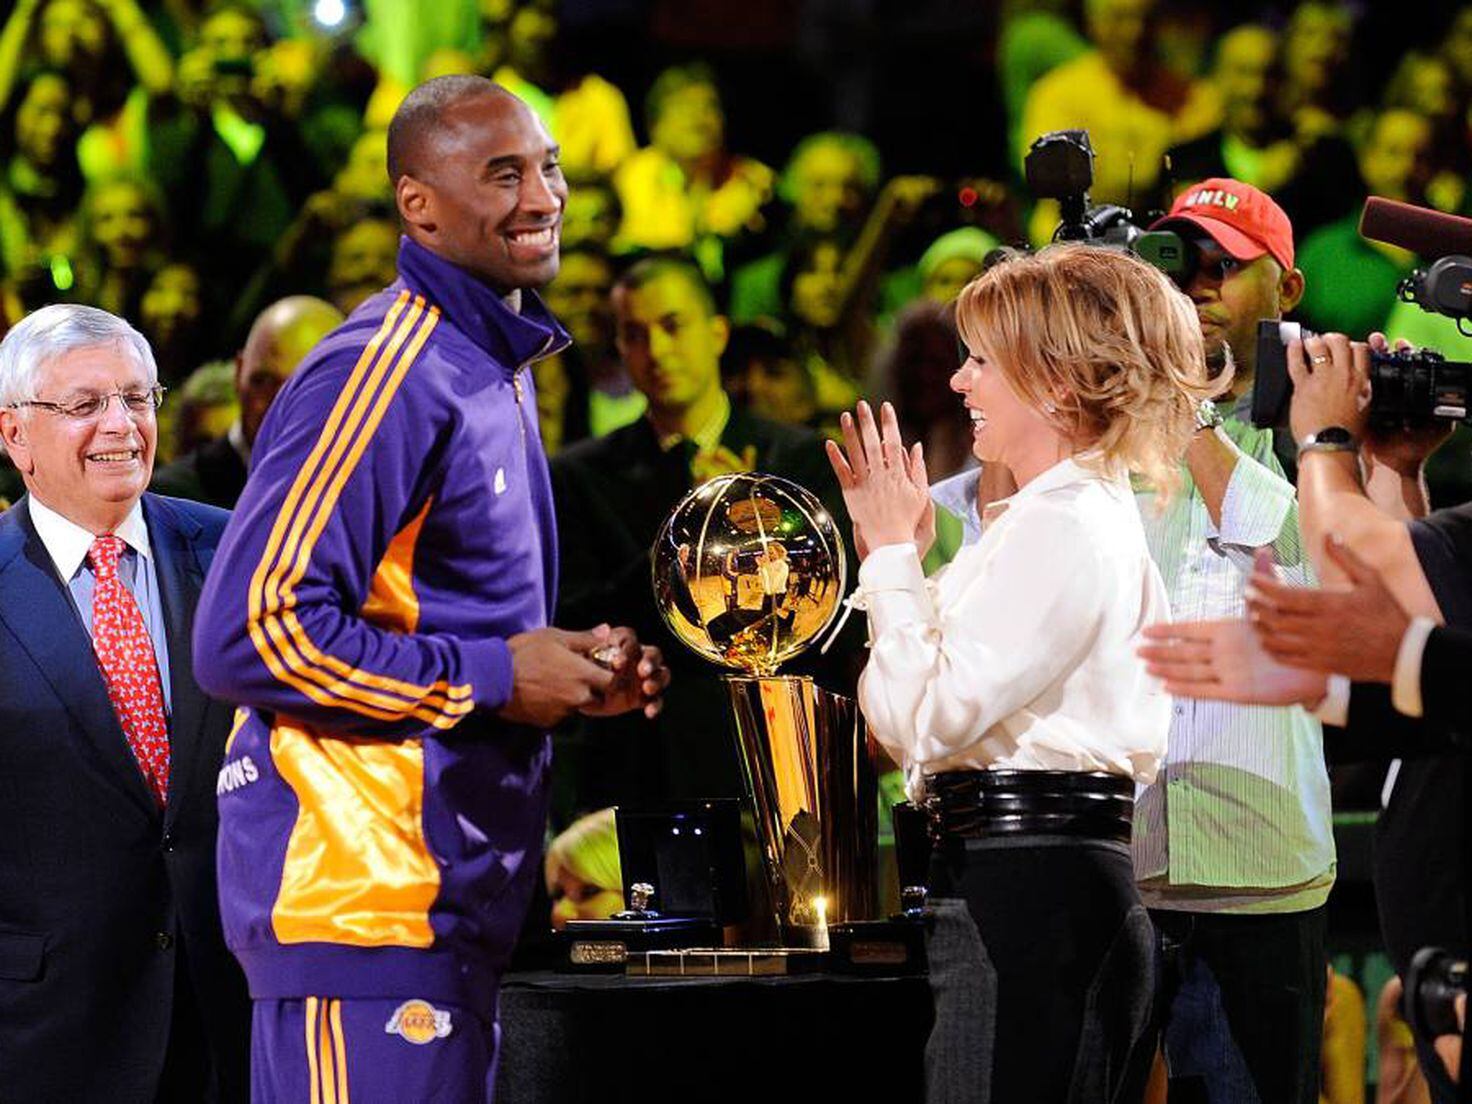 Jeanie Buss Says Lakers Have Made A Decision On Retiring LeBron